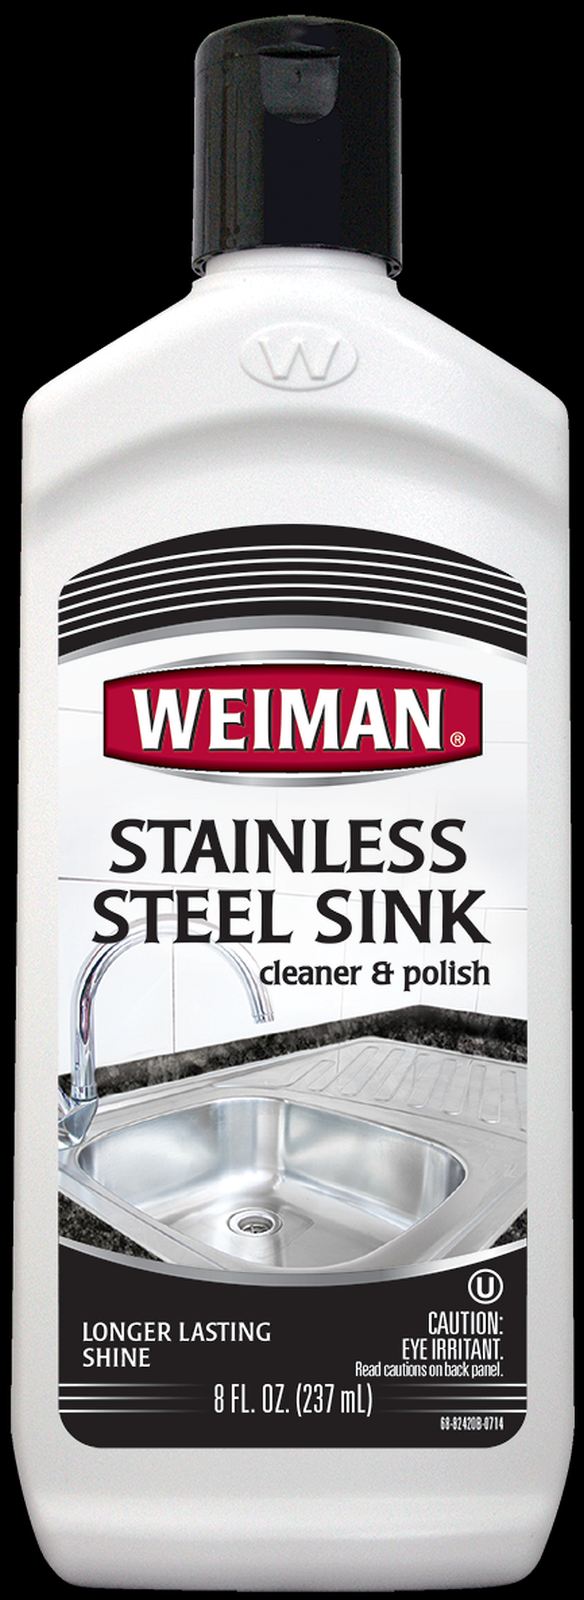 Primary image for Stainless Steel SINK Cleaner & Polish cReAmY cream cleaner cleanser WEIMAN 68